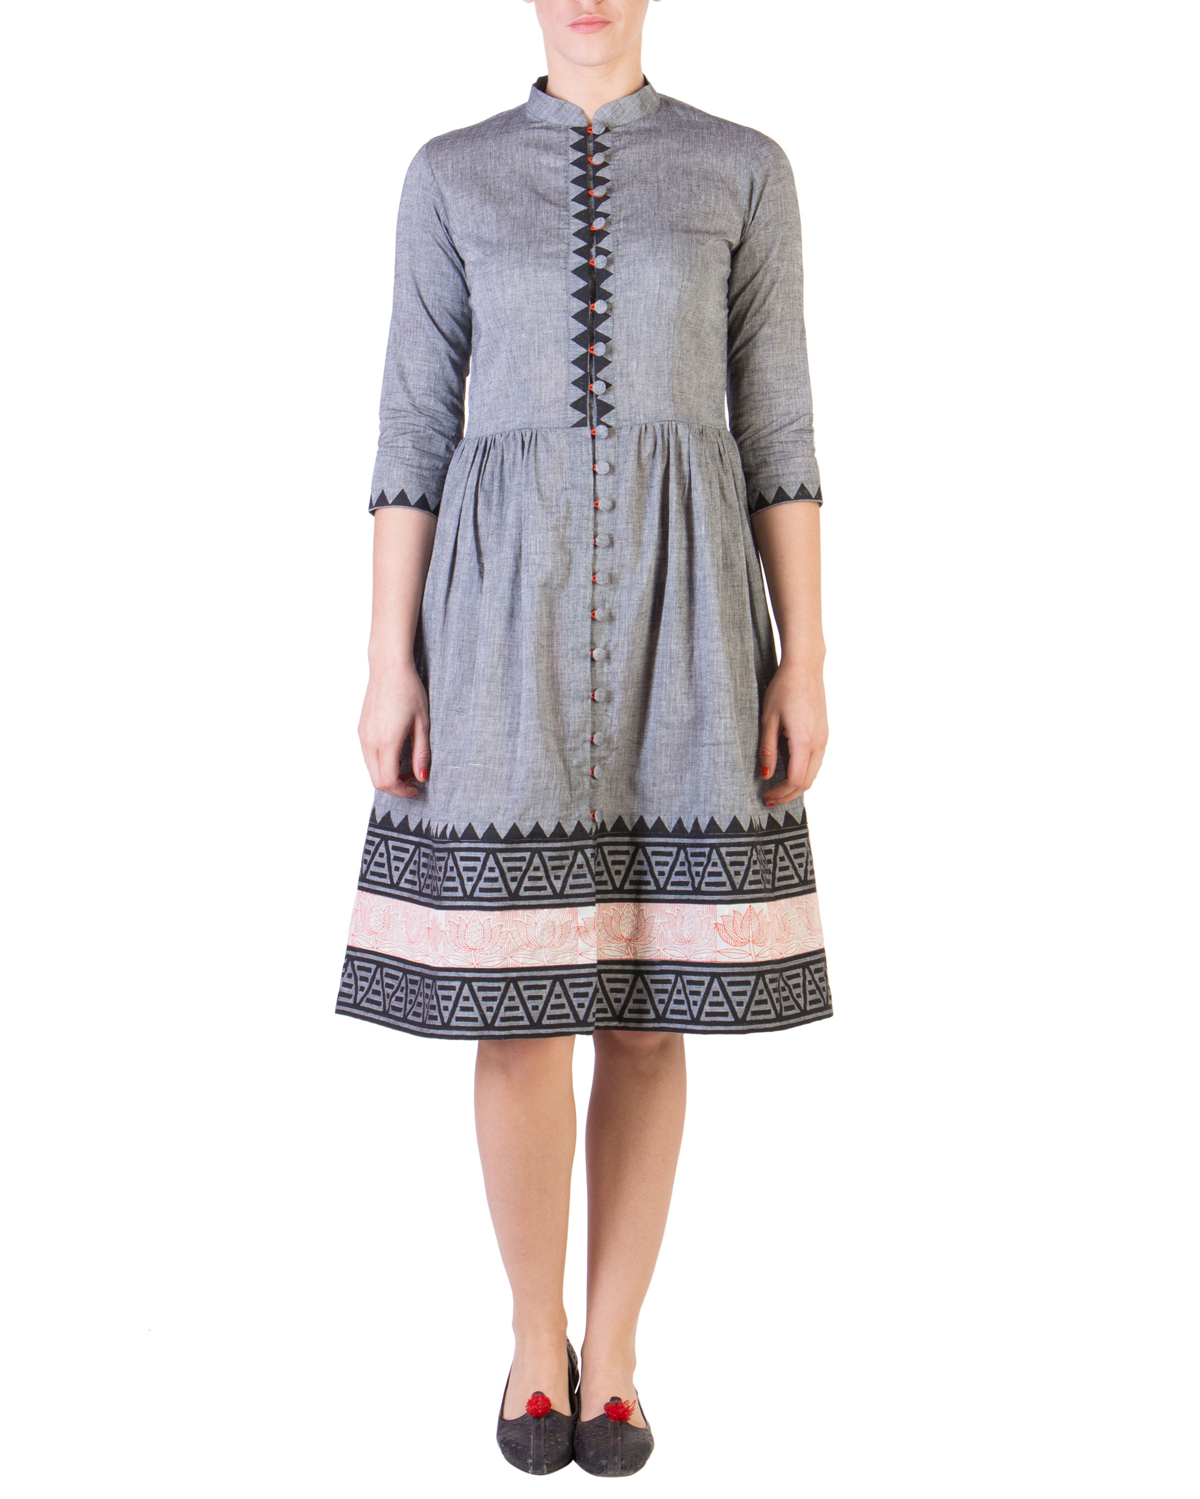 Grey mangalgiri dress with printed borders by ANS | The Secret Label